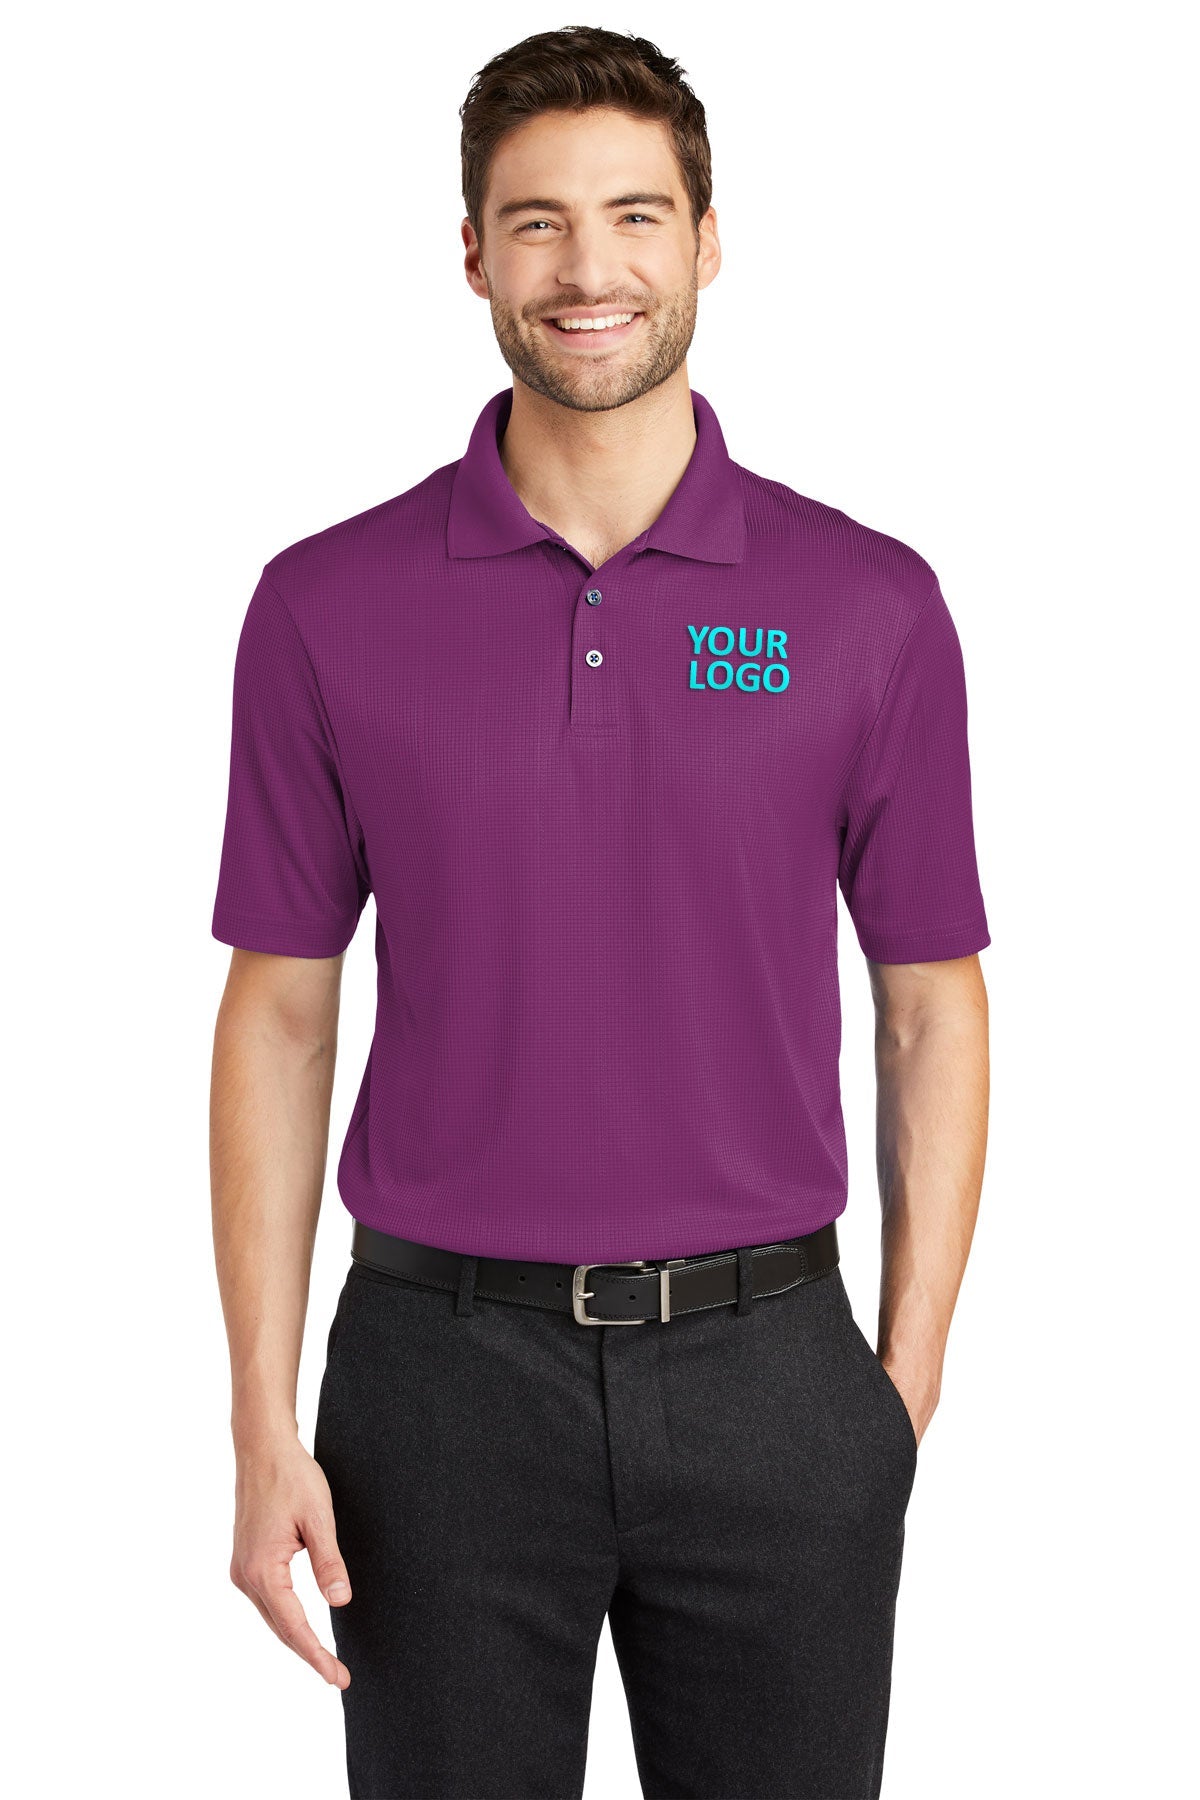 port authority violet purple k528 work polo shirts with logo